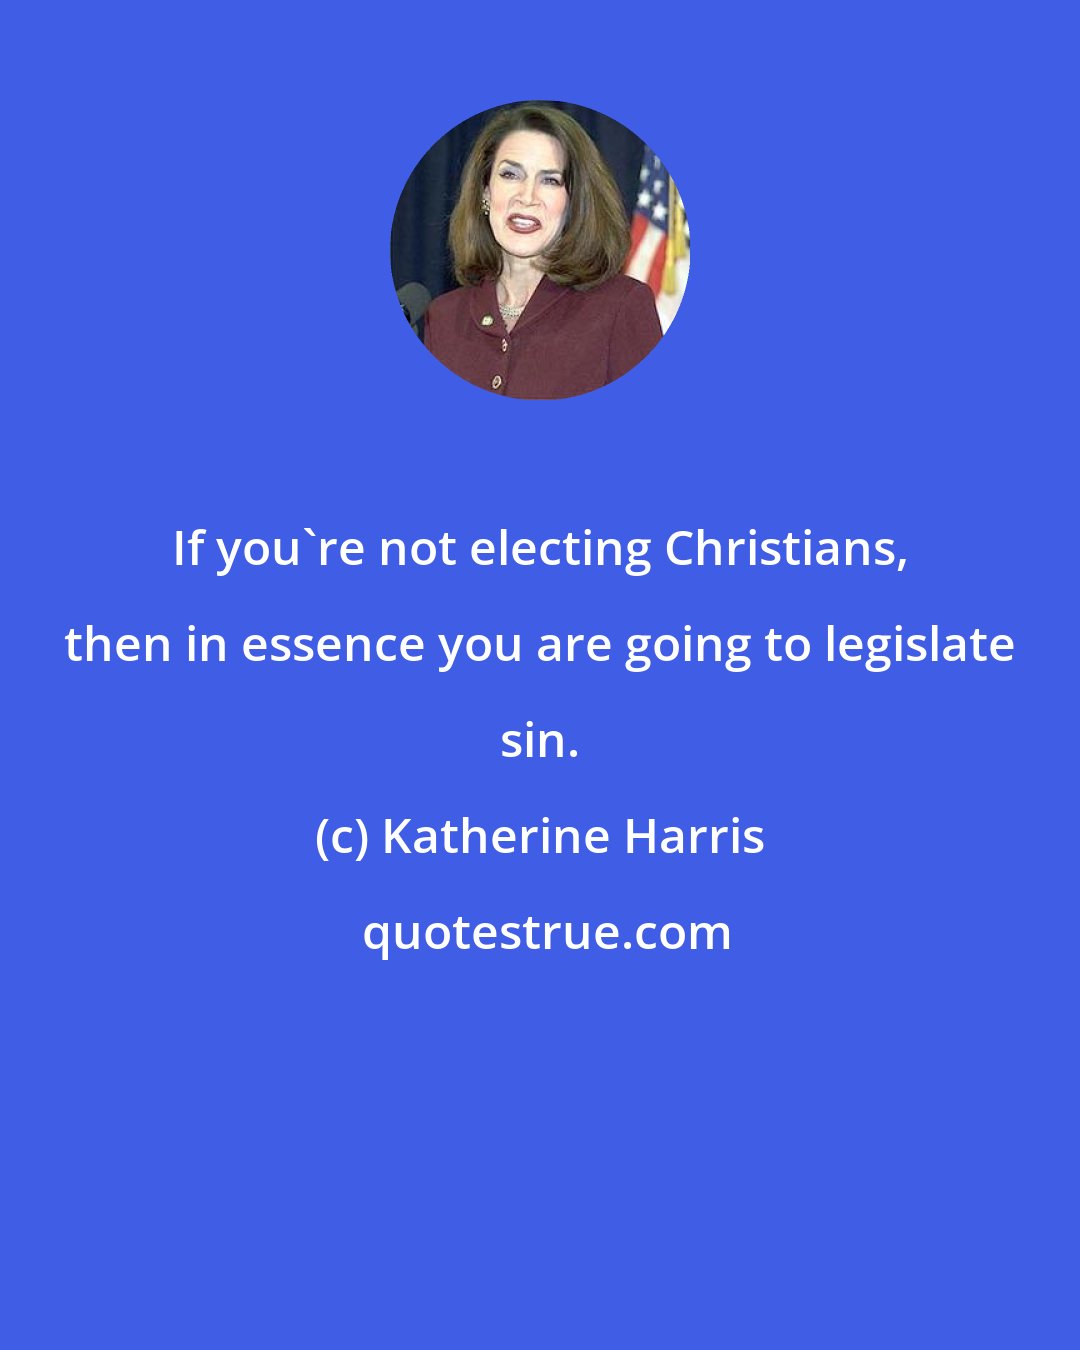 Katherine Harris: If you're not electing Christians, then in essence you are going to legislate sin.